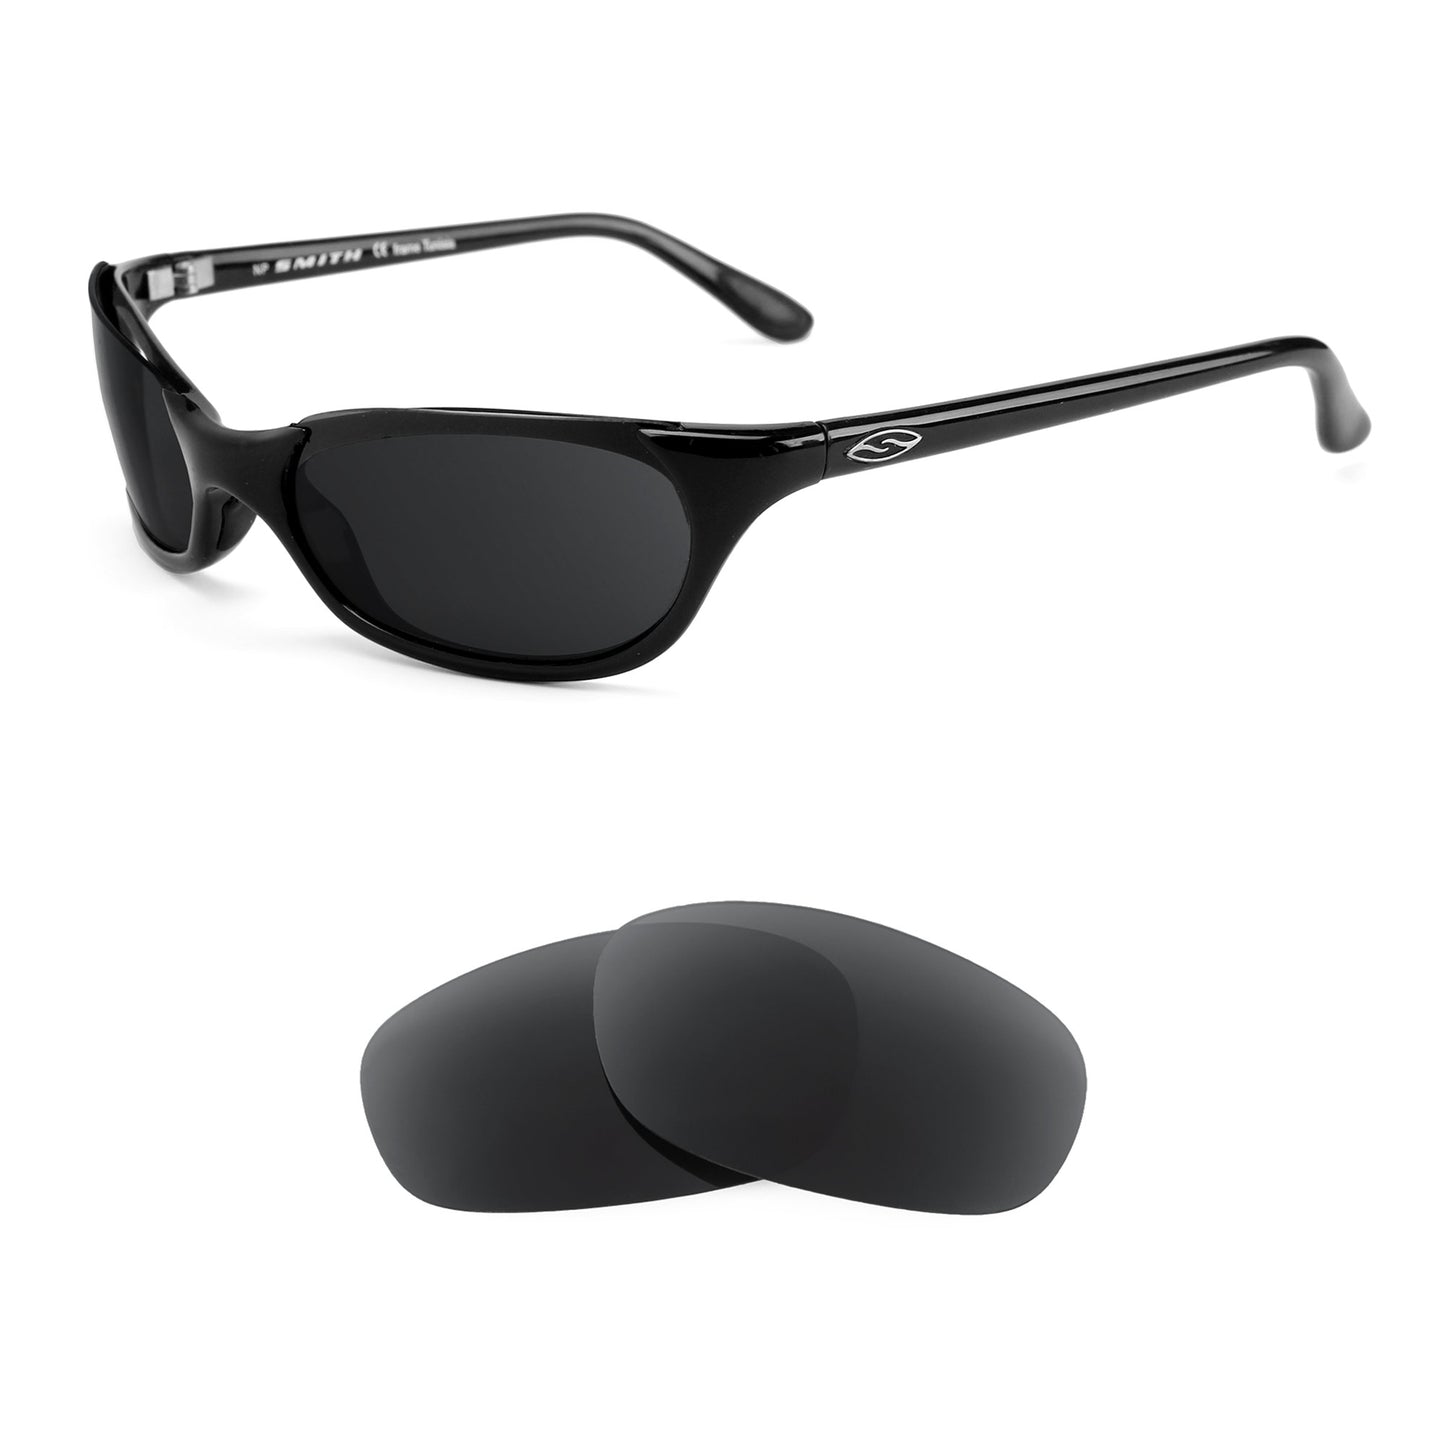 Smith Toaster sunglasses with replacement lenses